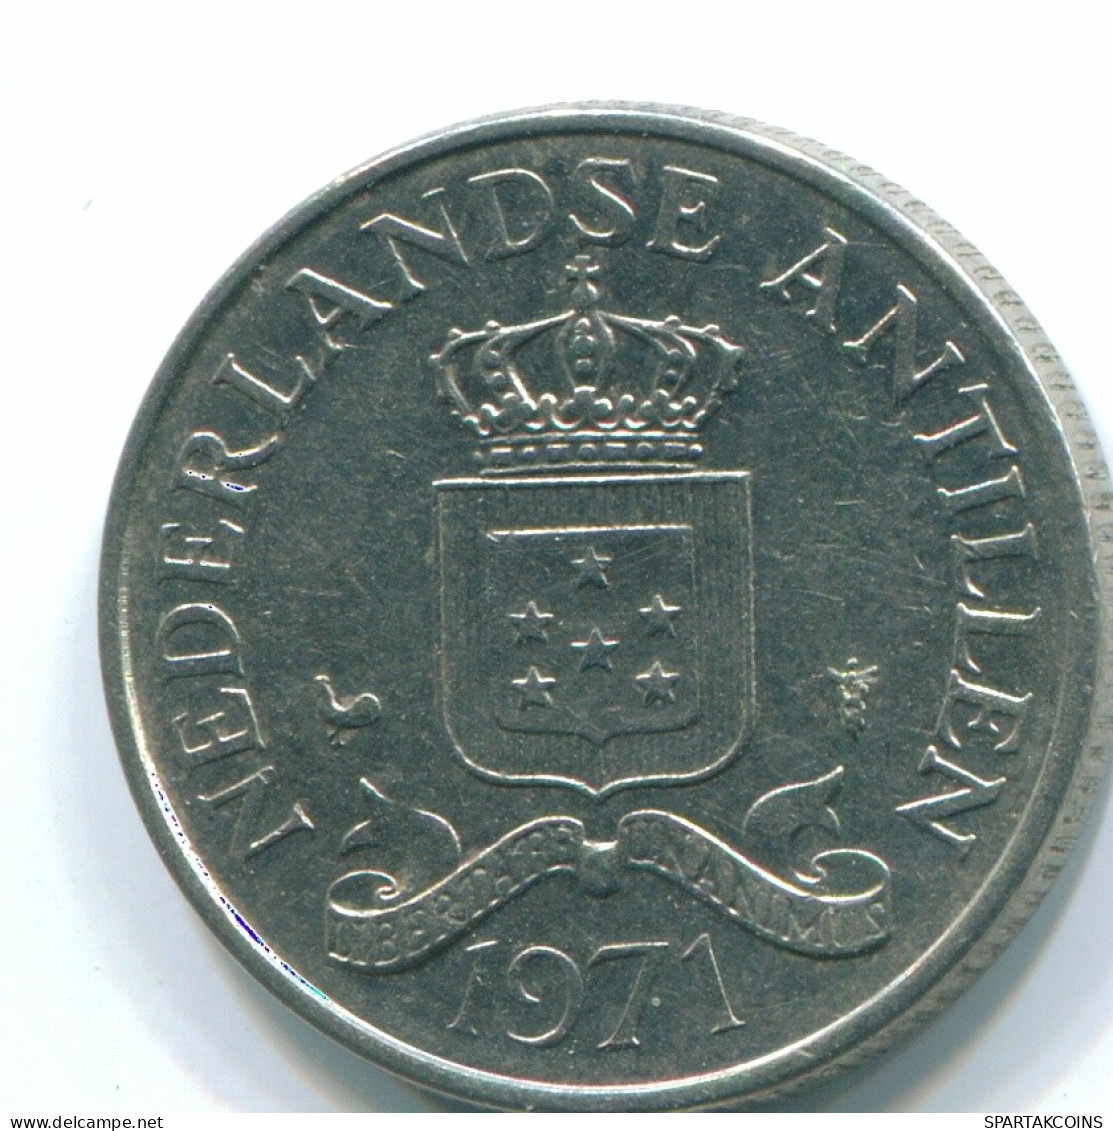 25 CENTS 1971 NETHERLANDS ANTILLES Nickel Colonial Coin #S11580.U.A - Netherlands Antilles